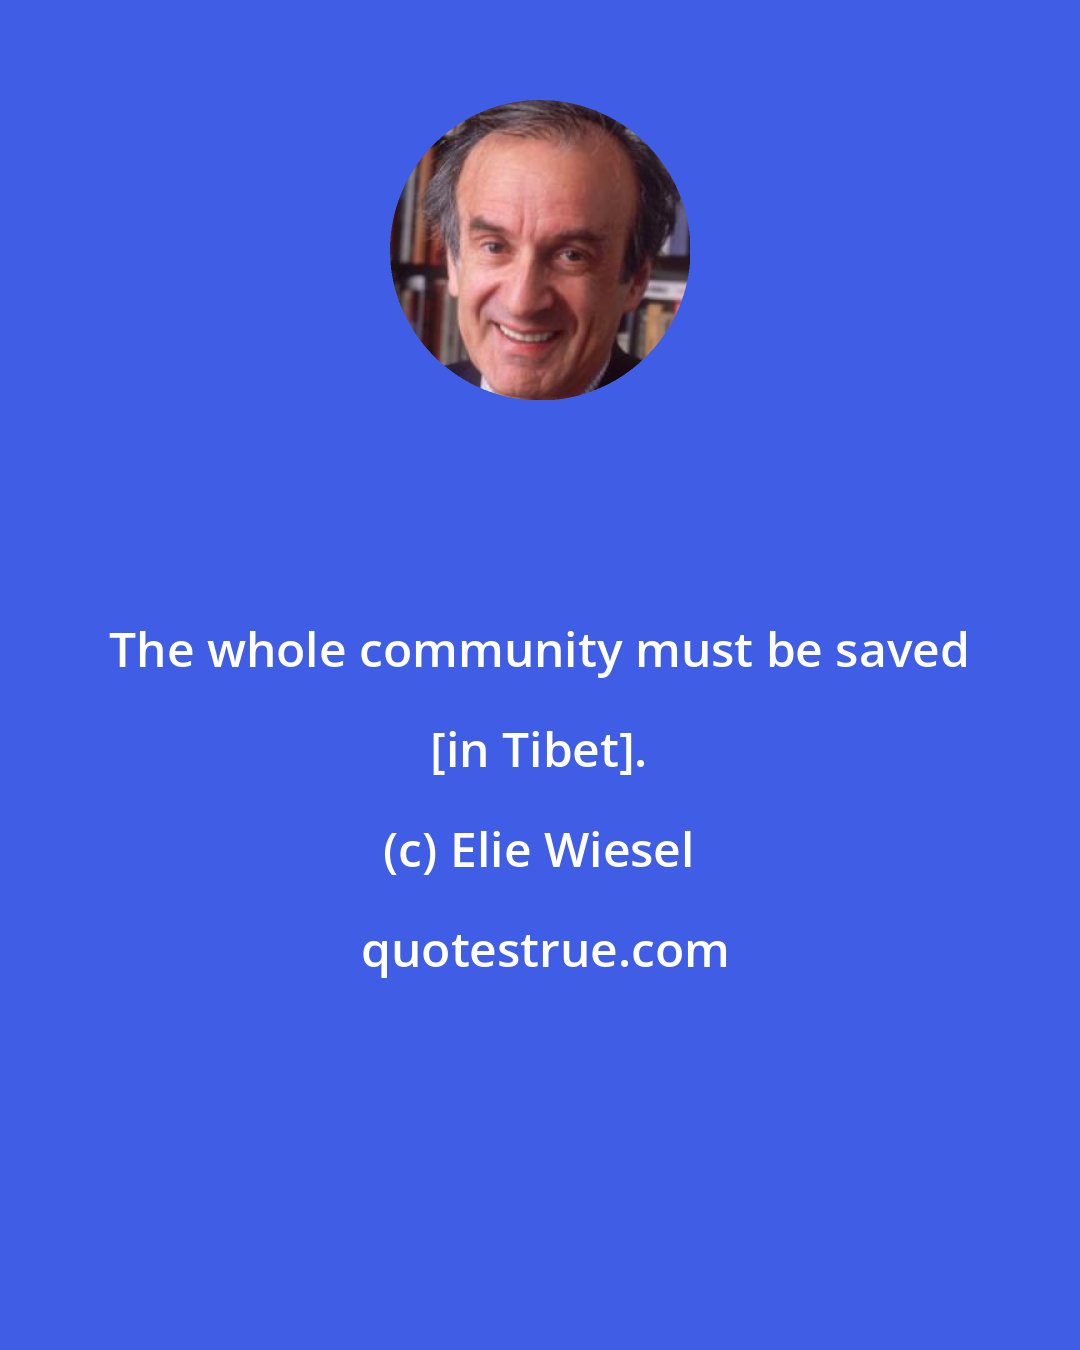 Elie Wiesel: The whole community must be saved [in Tibet].